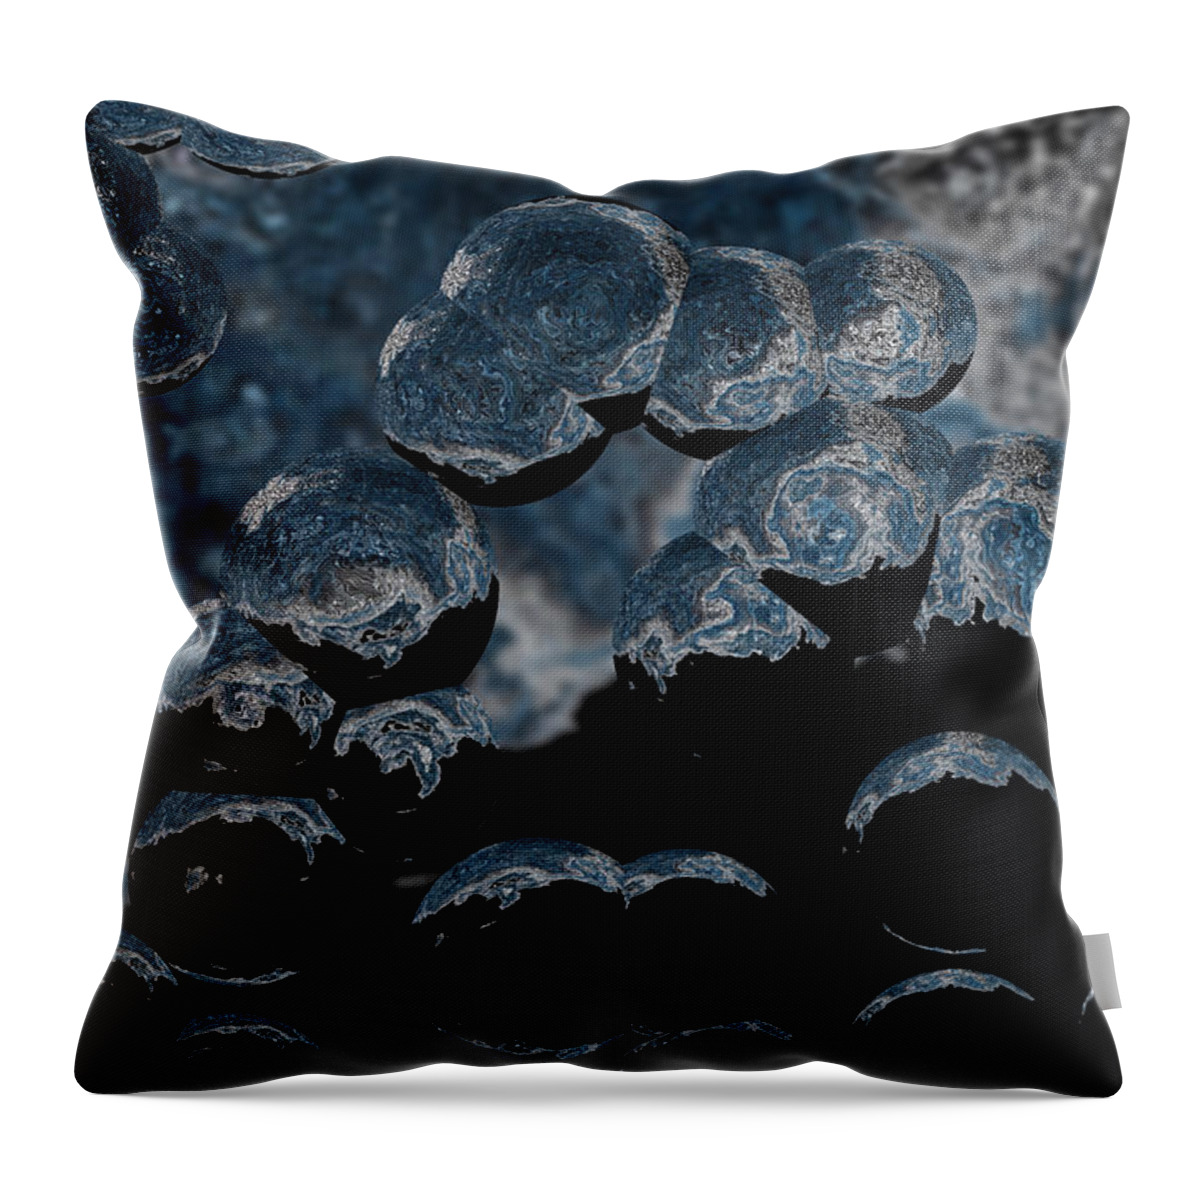 Abstract Throw Pillow featuring the digital art Black Trouble by Scott S Baker